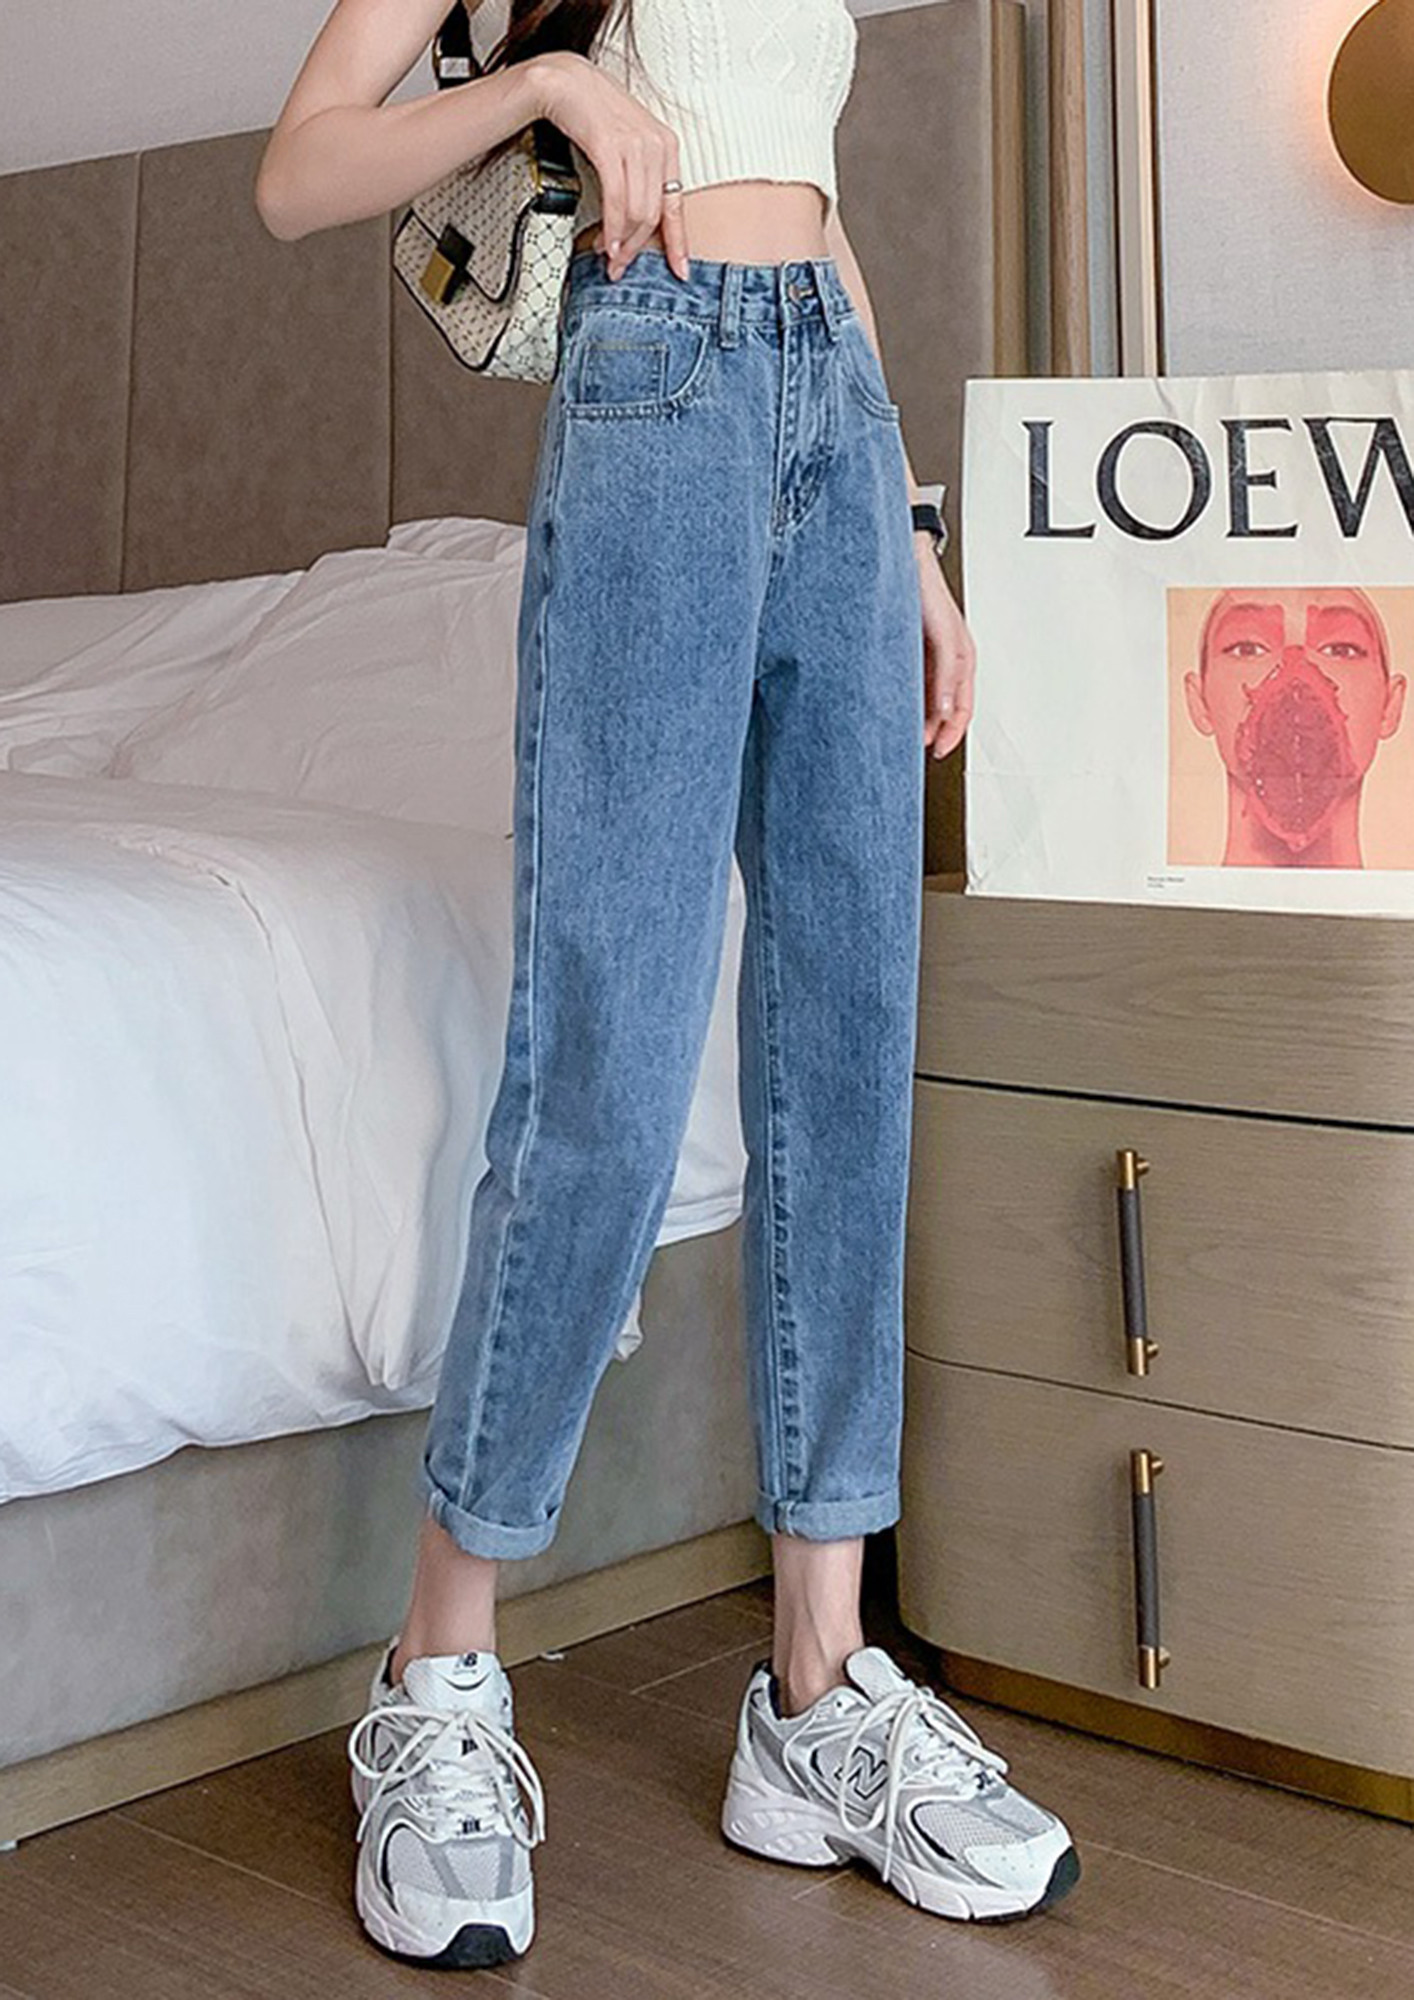 Update more than 132 denim jeans for women latest